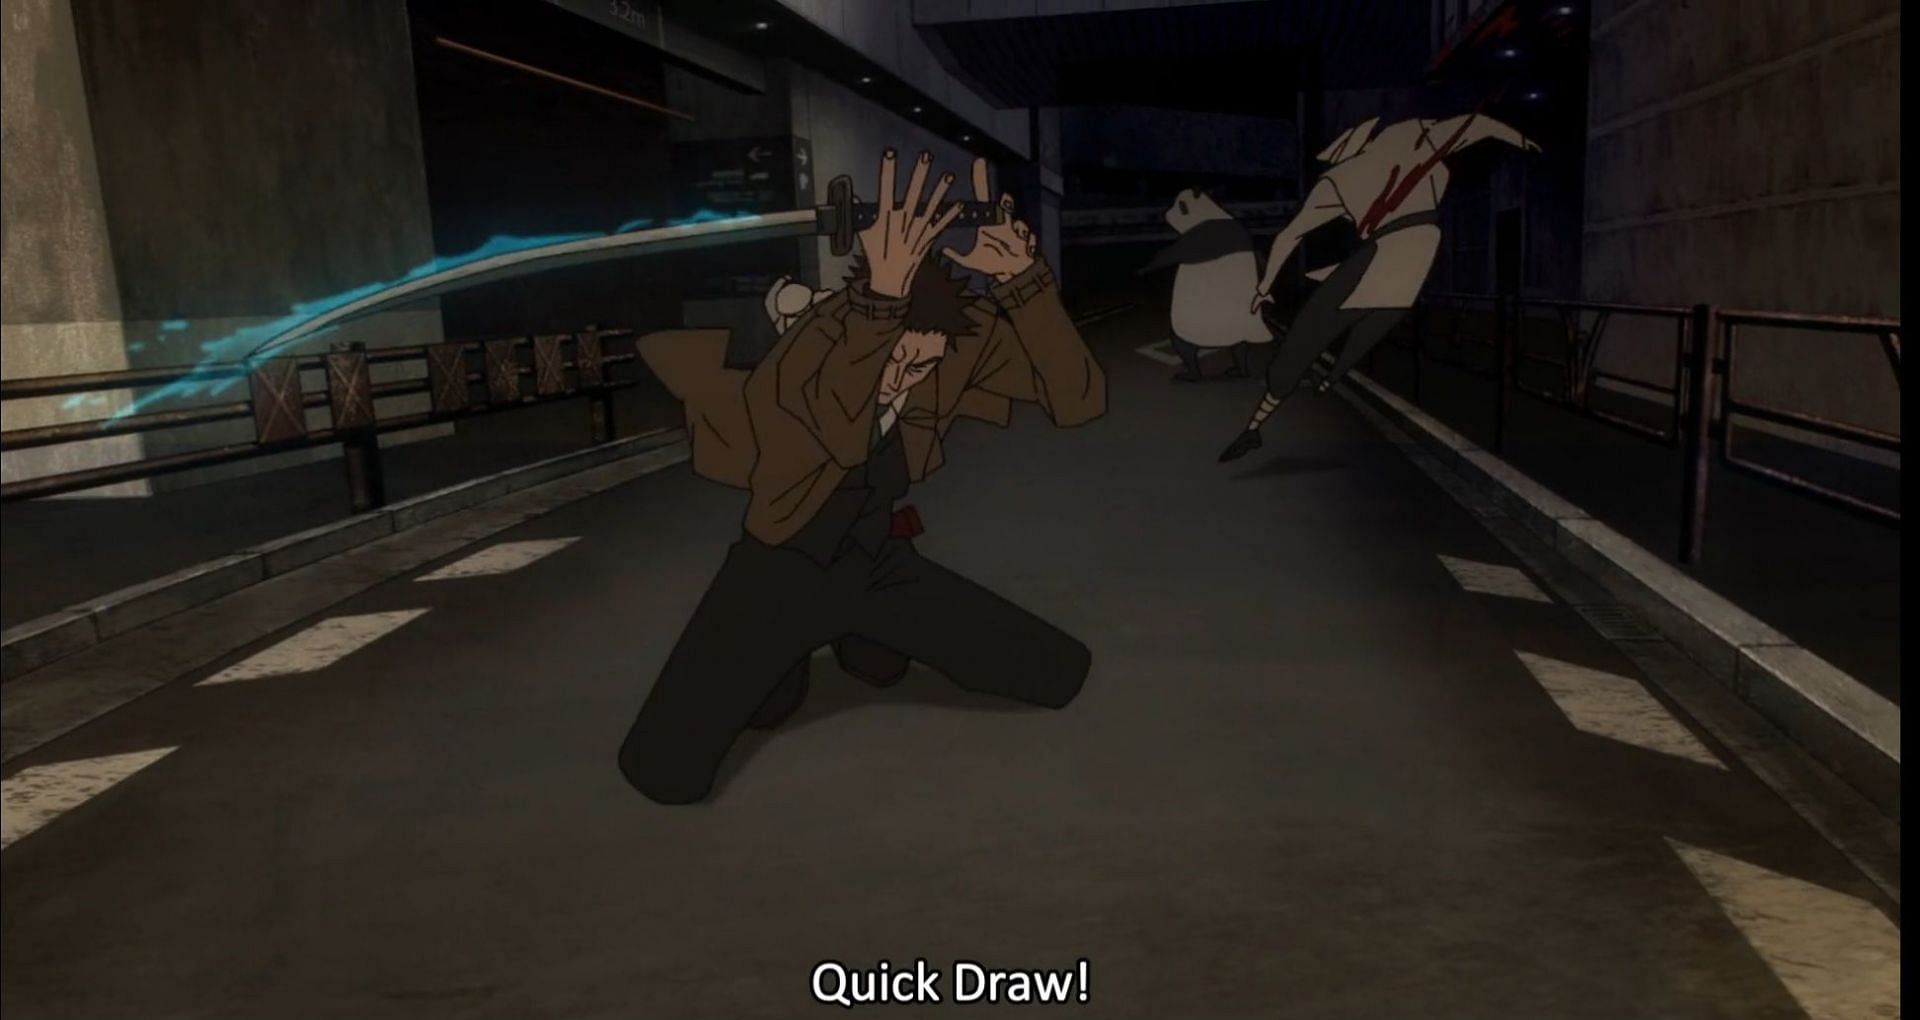 Kusakabe using the Batto-Sword Draw as seen in the anime series (Image via MAPPA)